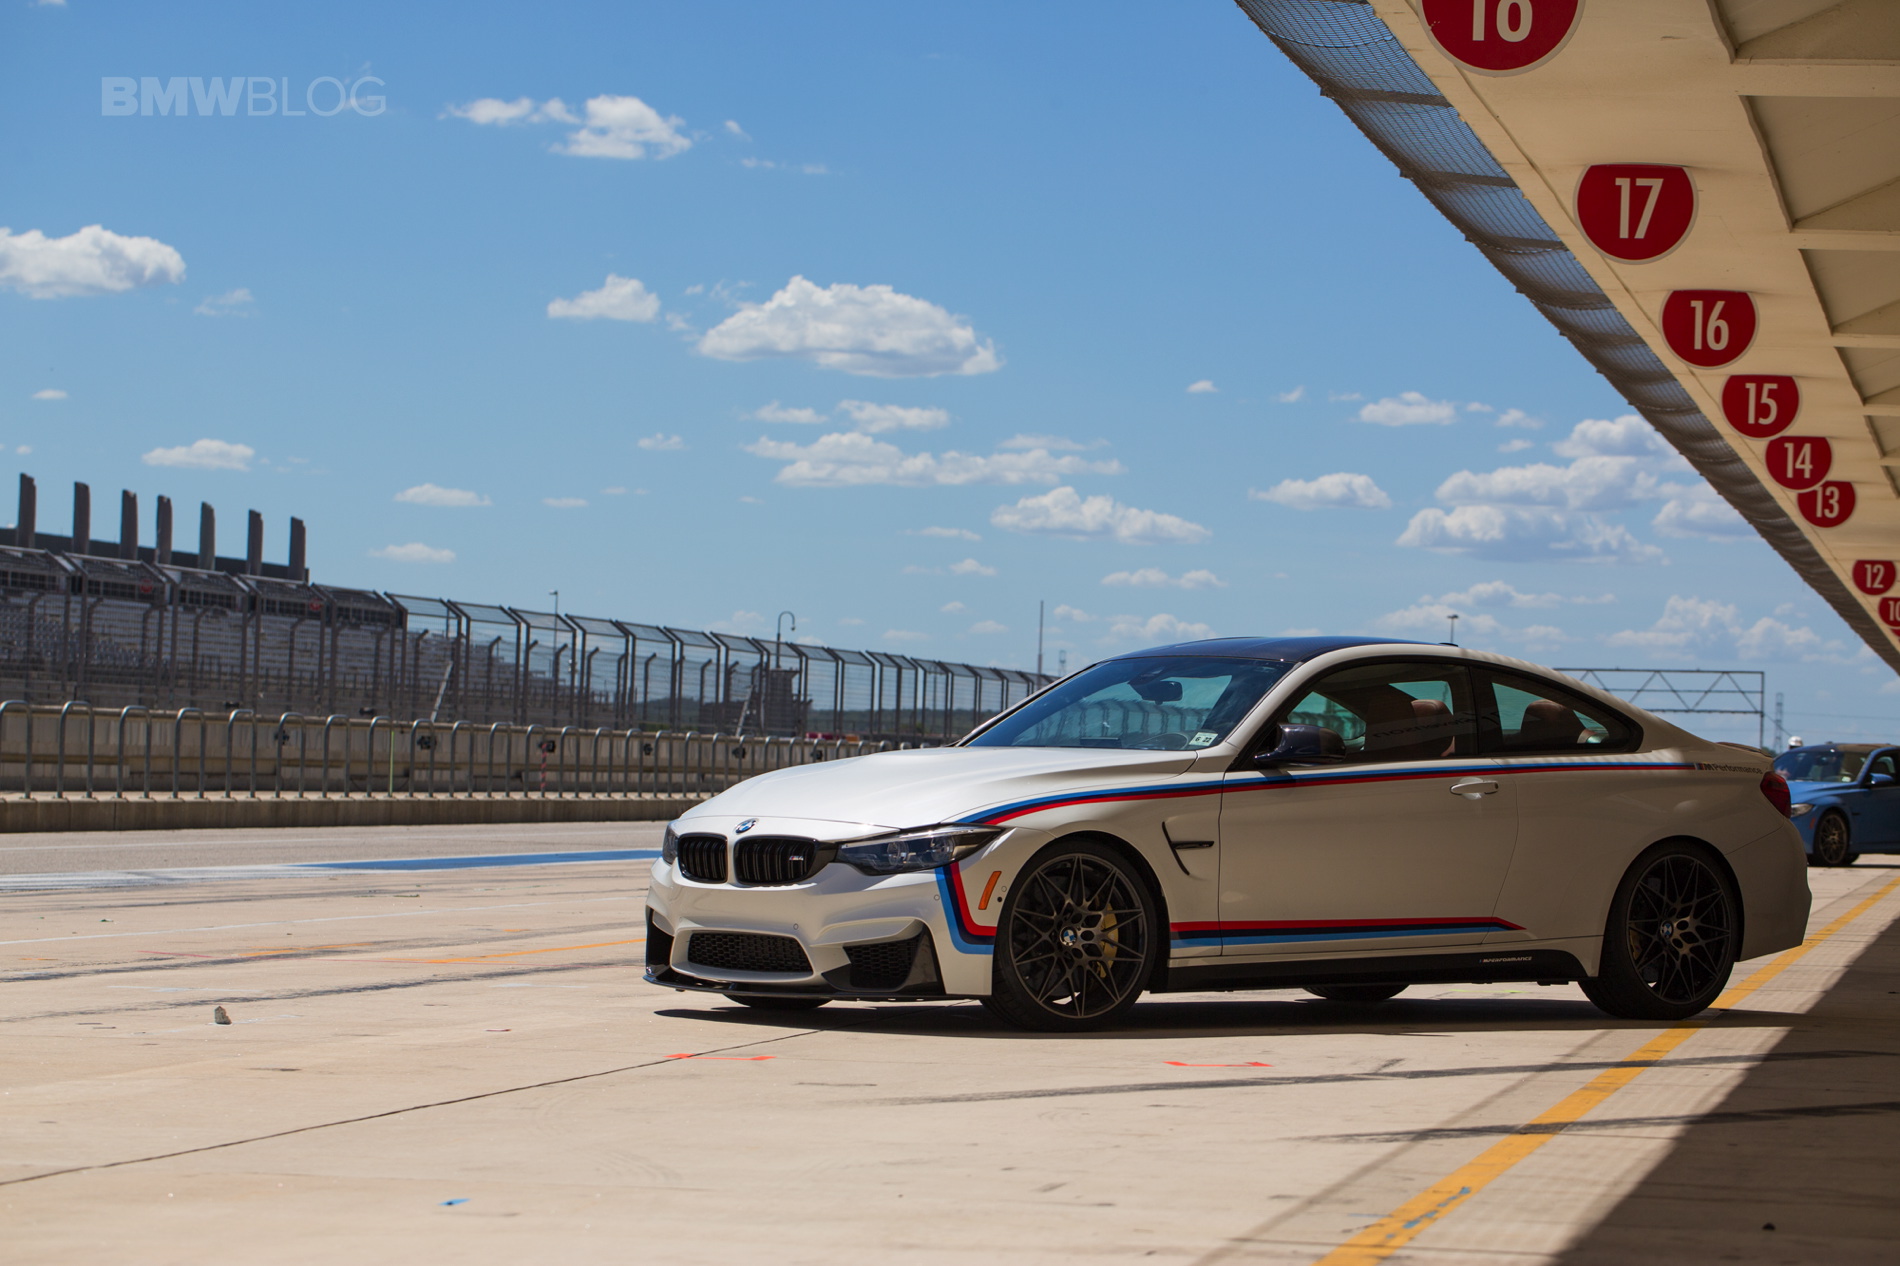 PHOTO GALLERY BMW M Track Days at Circuit of the Americas